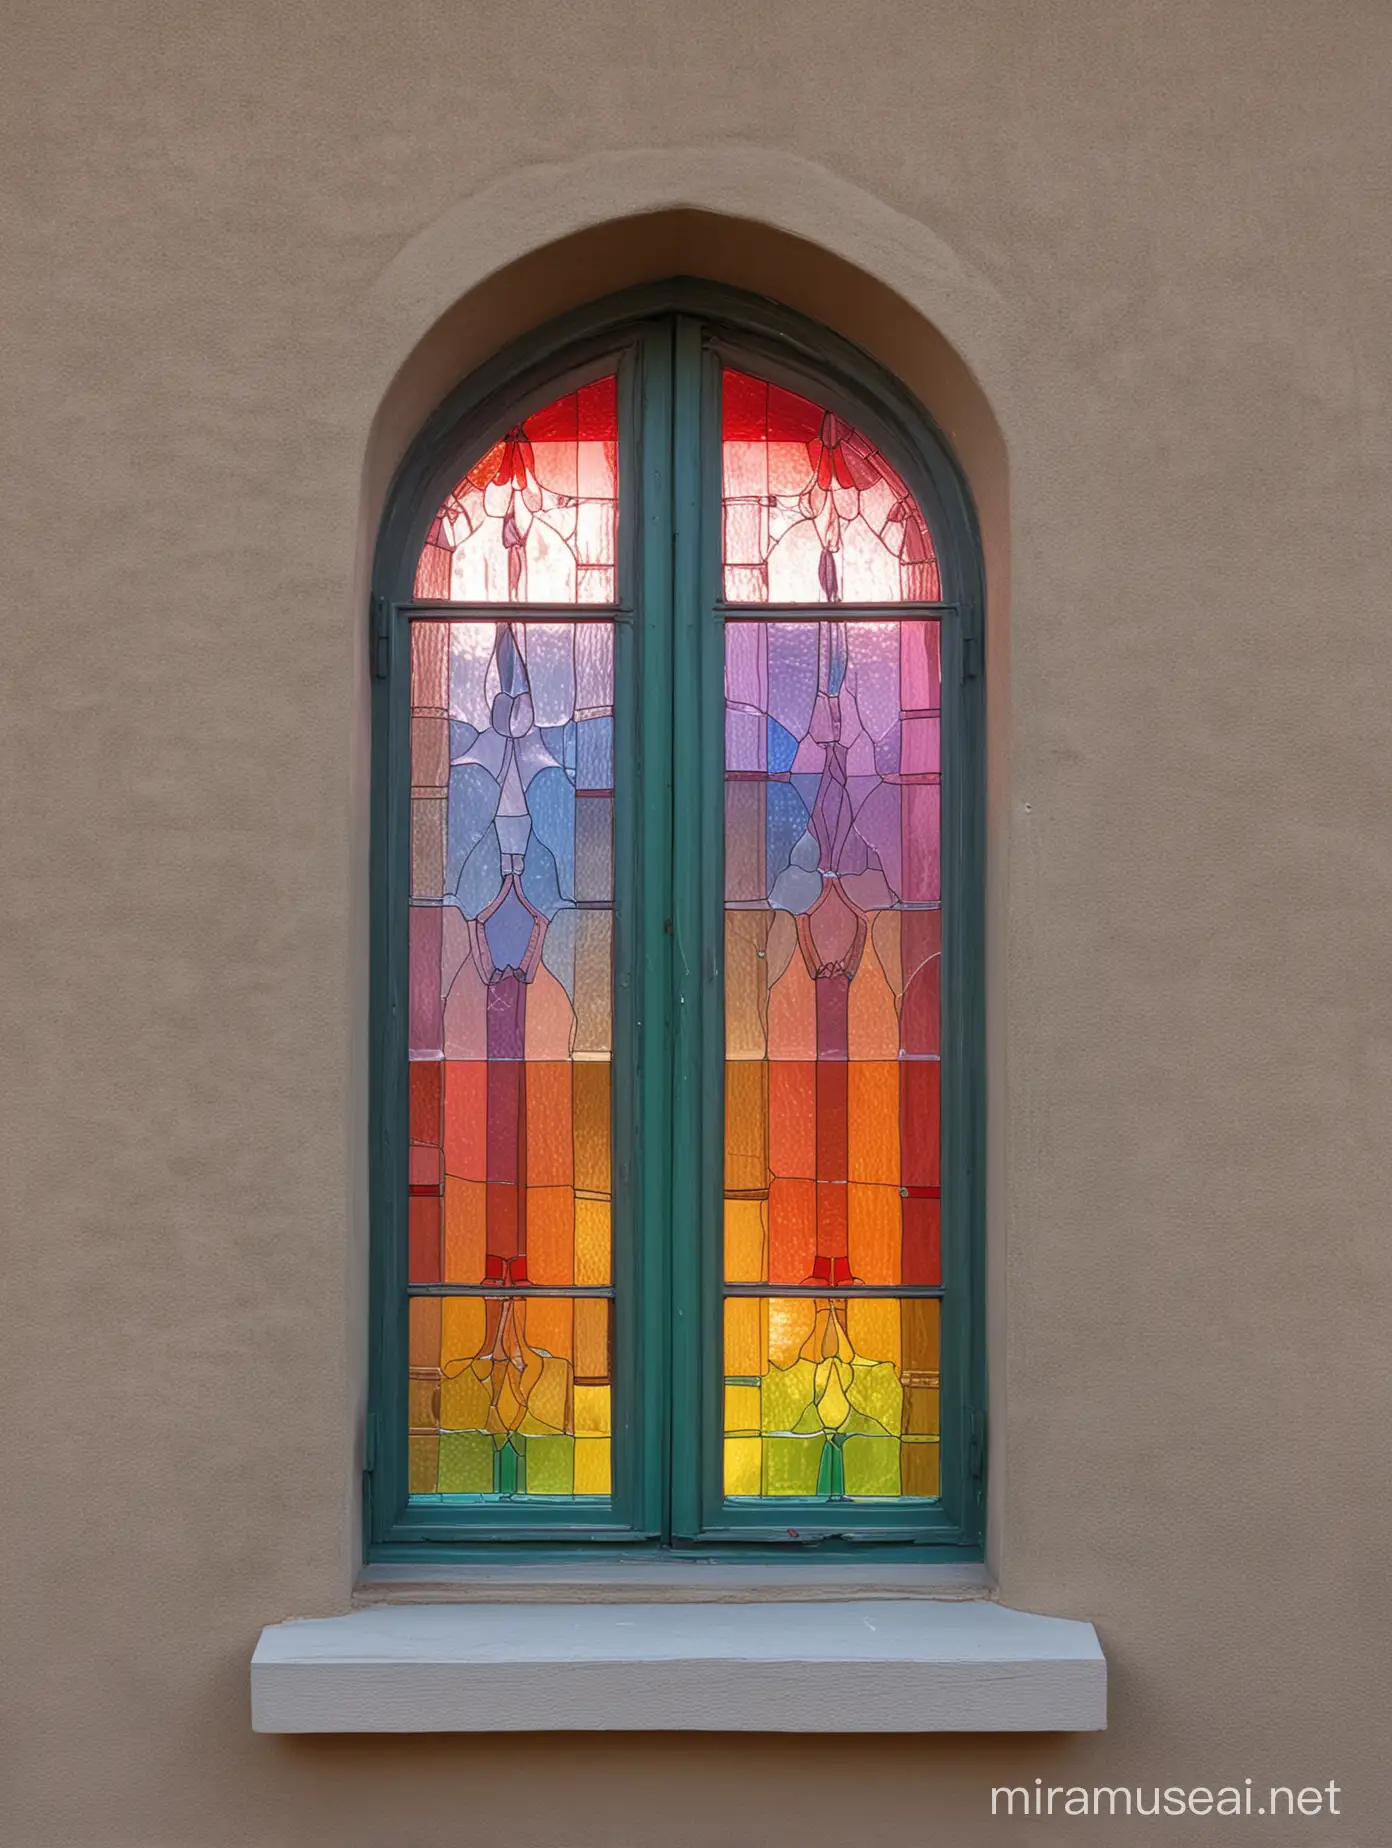 Leaded windows glasses color geadient rainbow. The light shines through behind it.